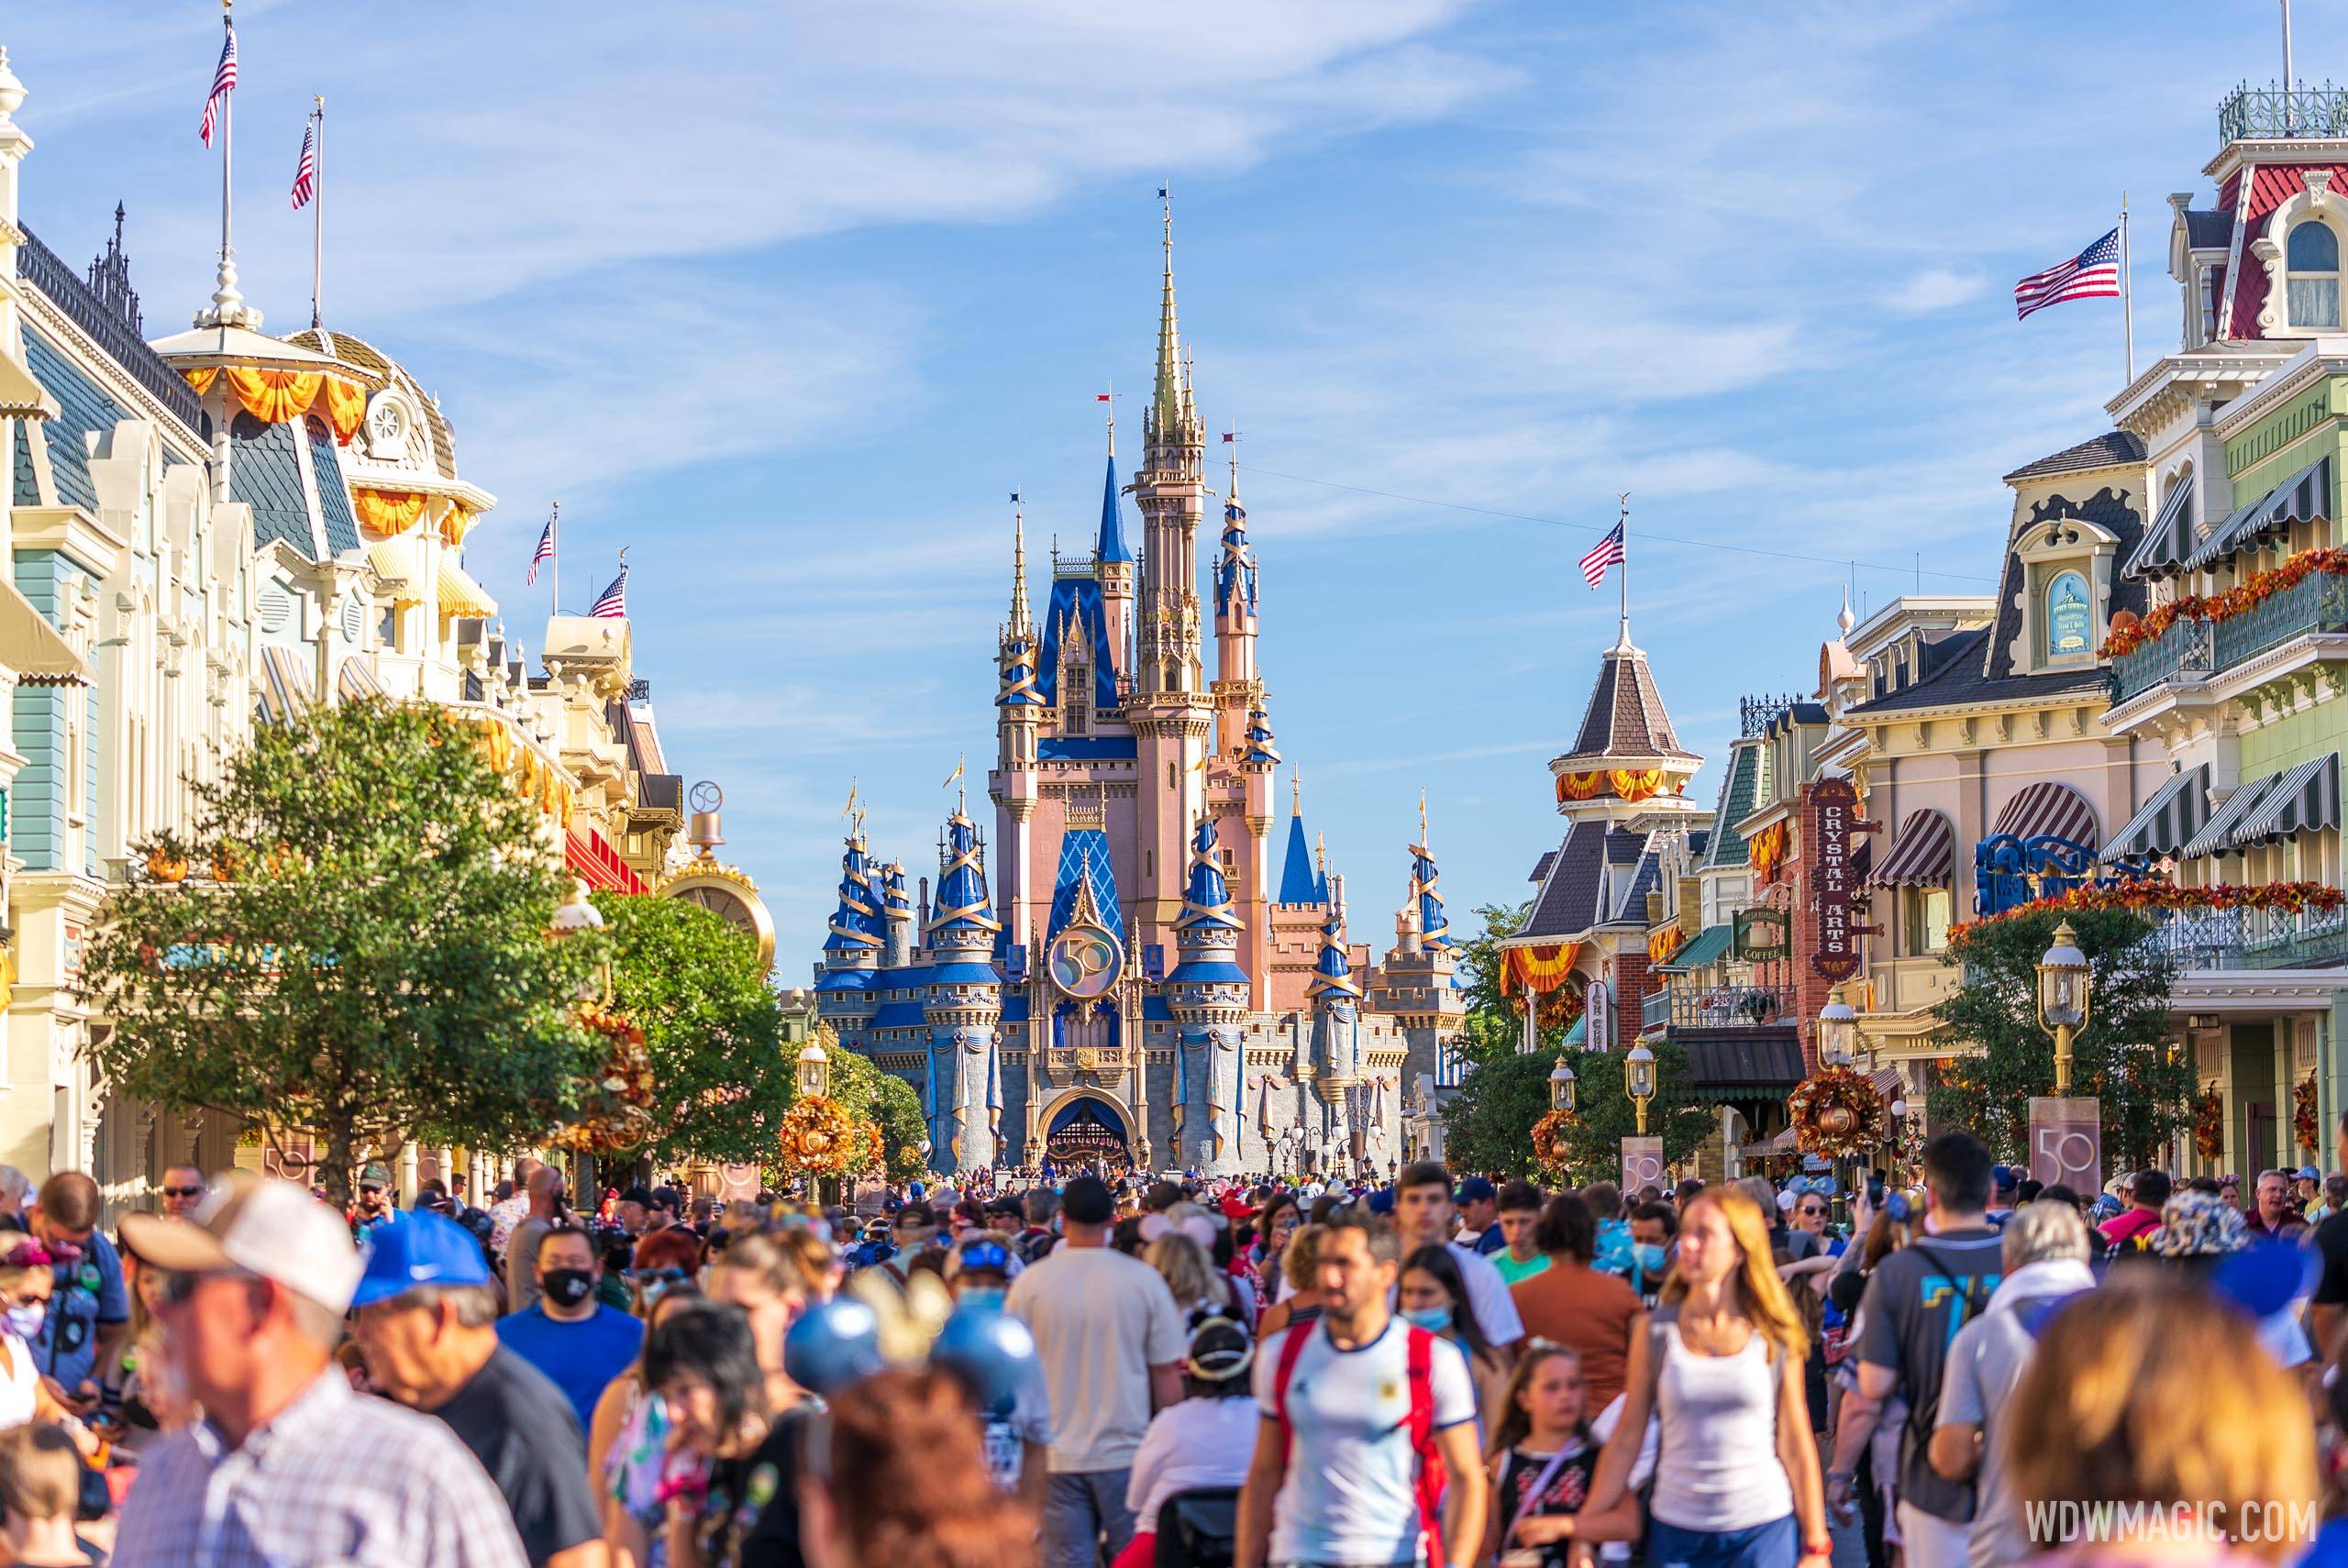 Disney Cast Members will have the highest starting wage of the Orlando area theme parks under the new agreement